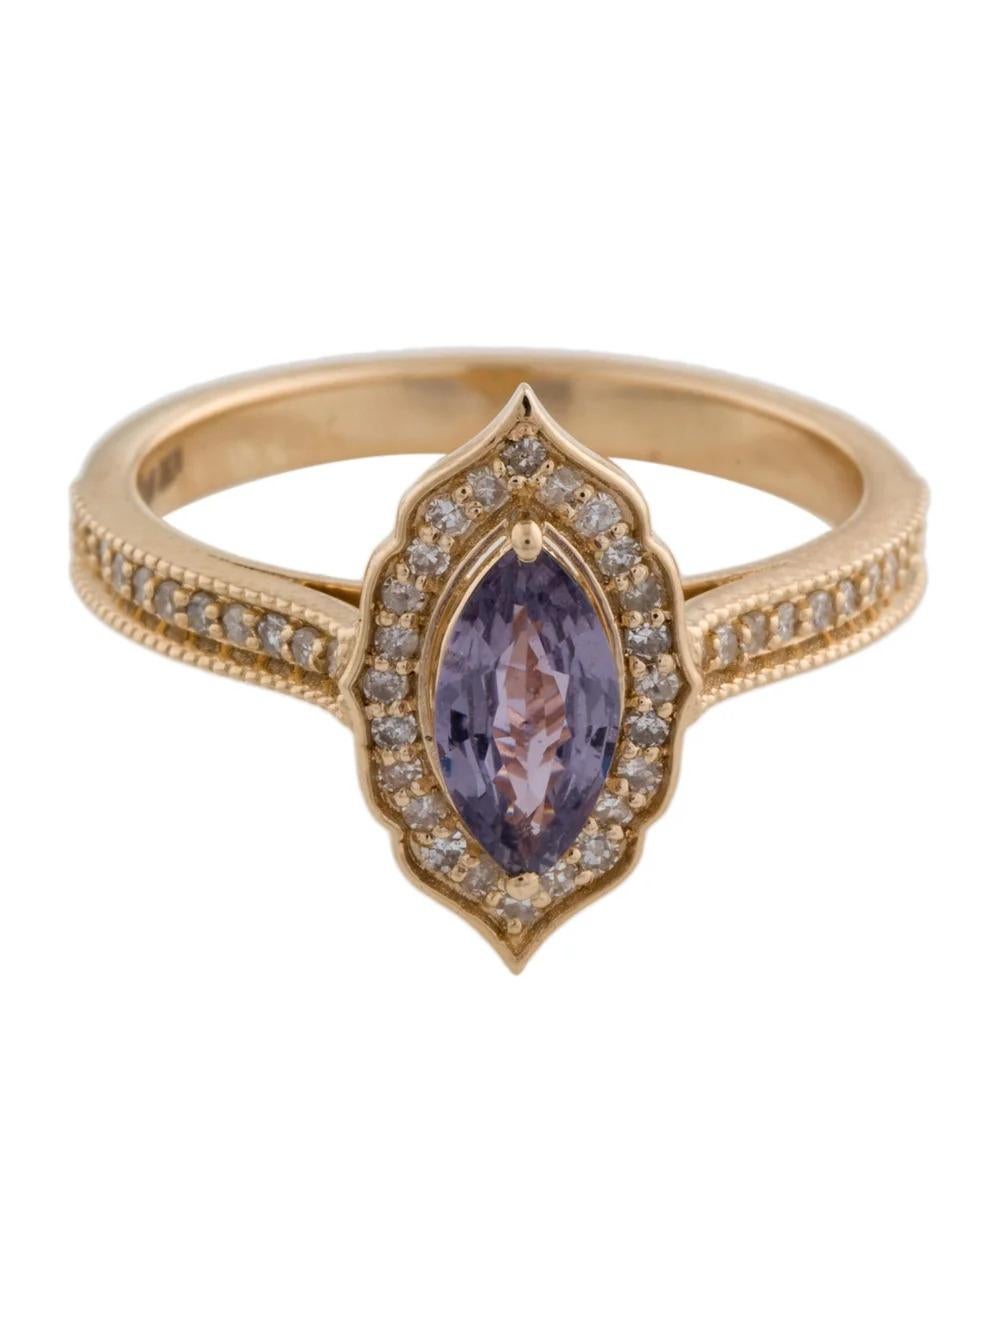 Marquise Cut 14K Sapphire & Diamond Cocktail Ring Size 6.75 - Elegant Design, Timeless Beauty For Sale